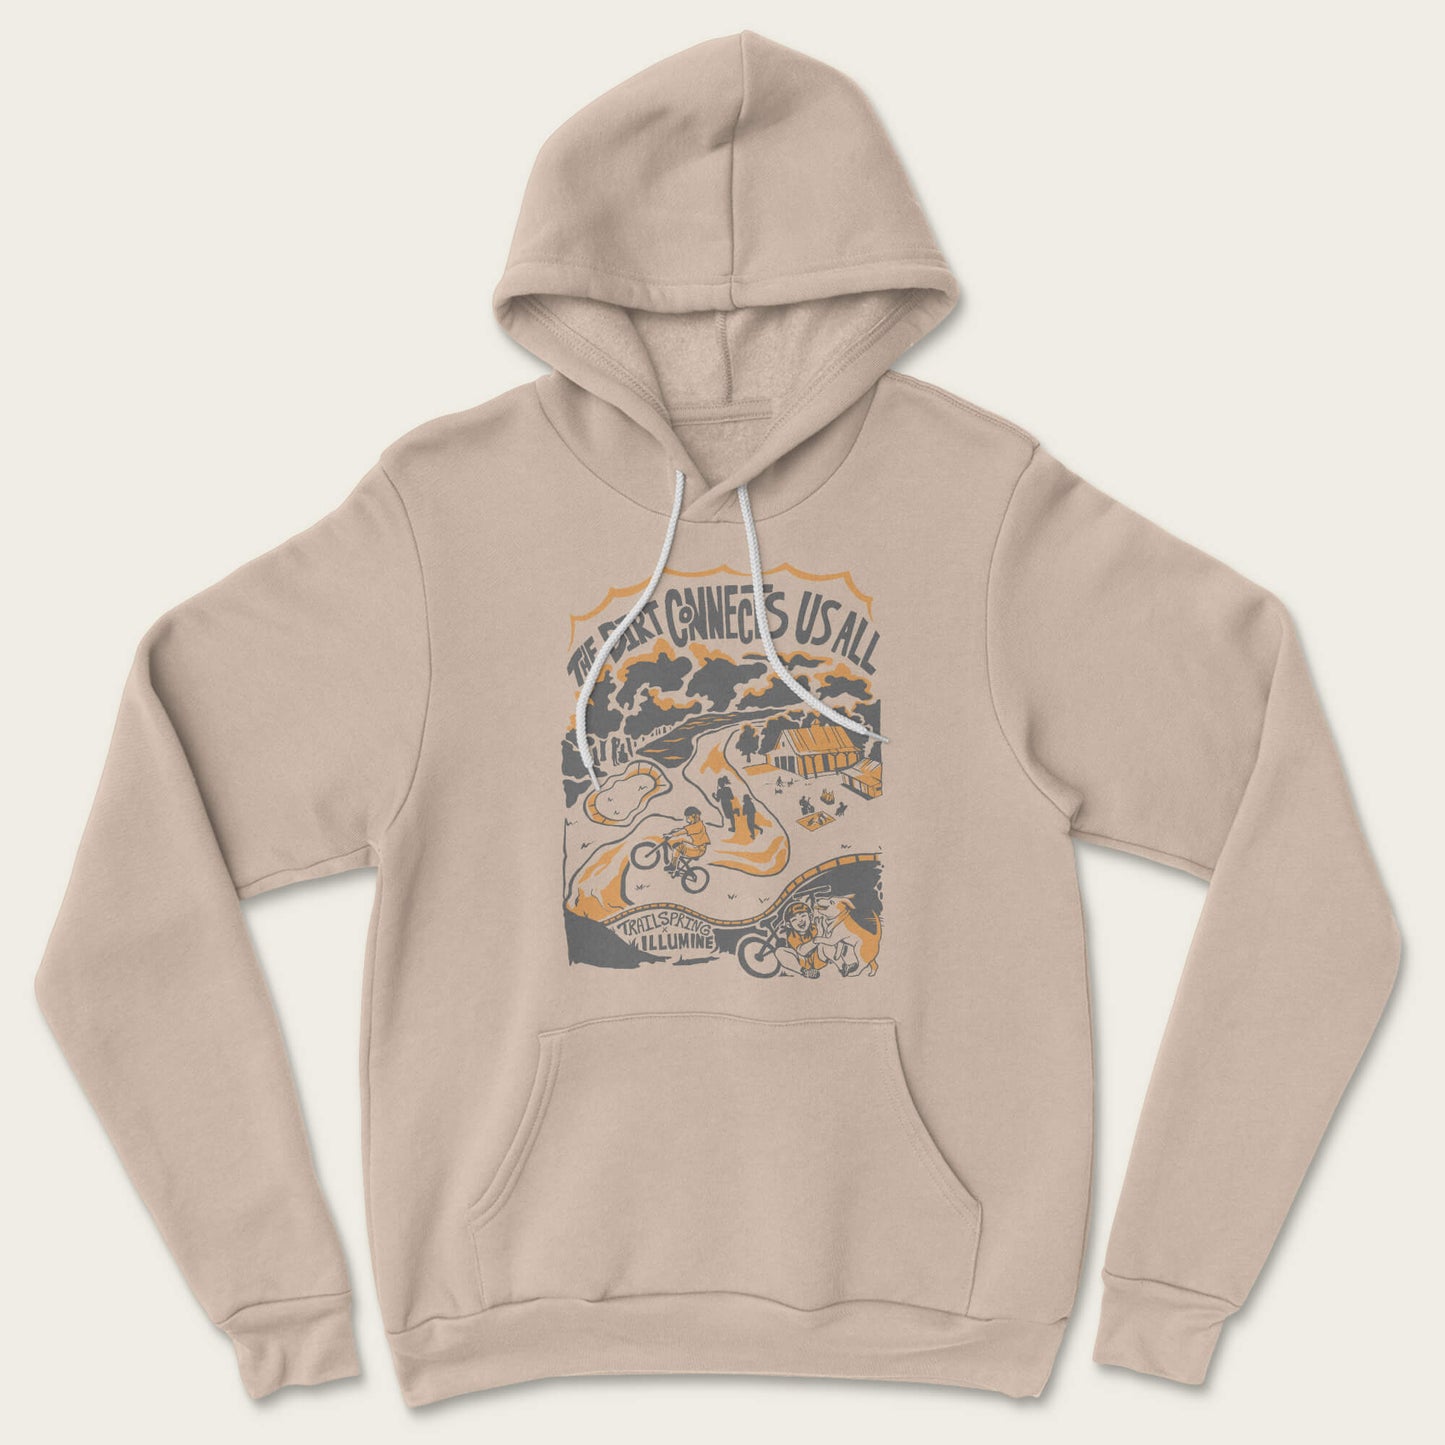 The Dirt Connects Us All Hoodie - Tan